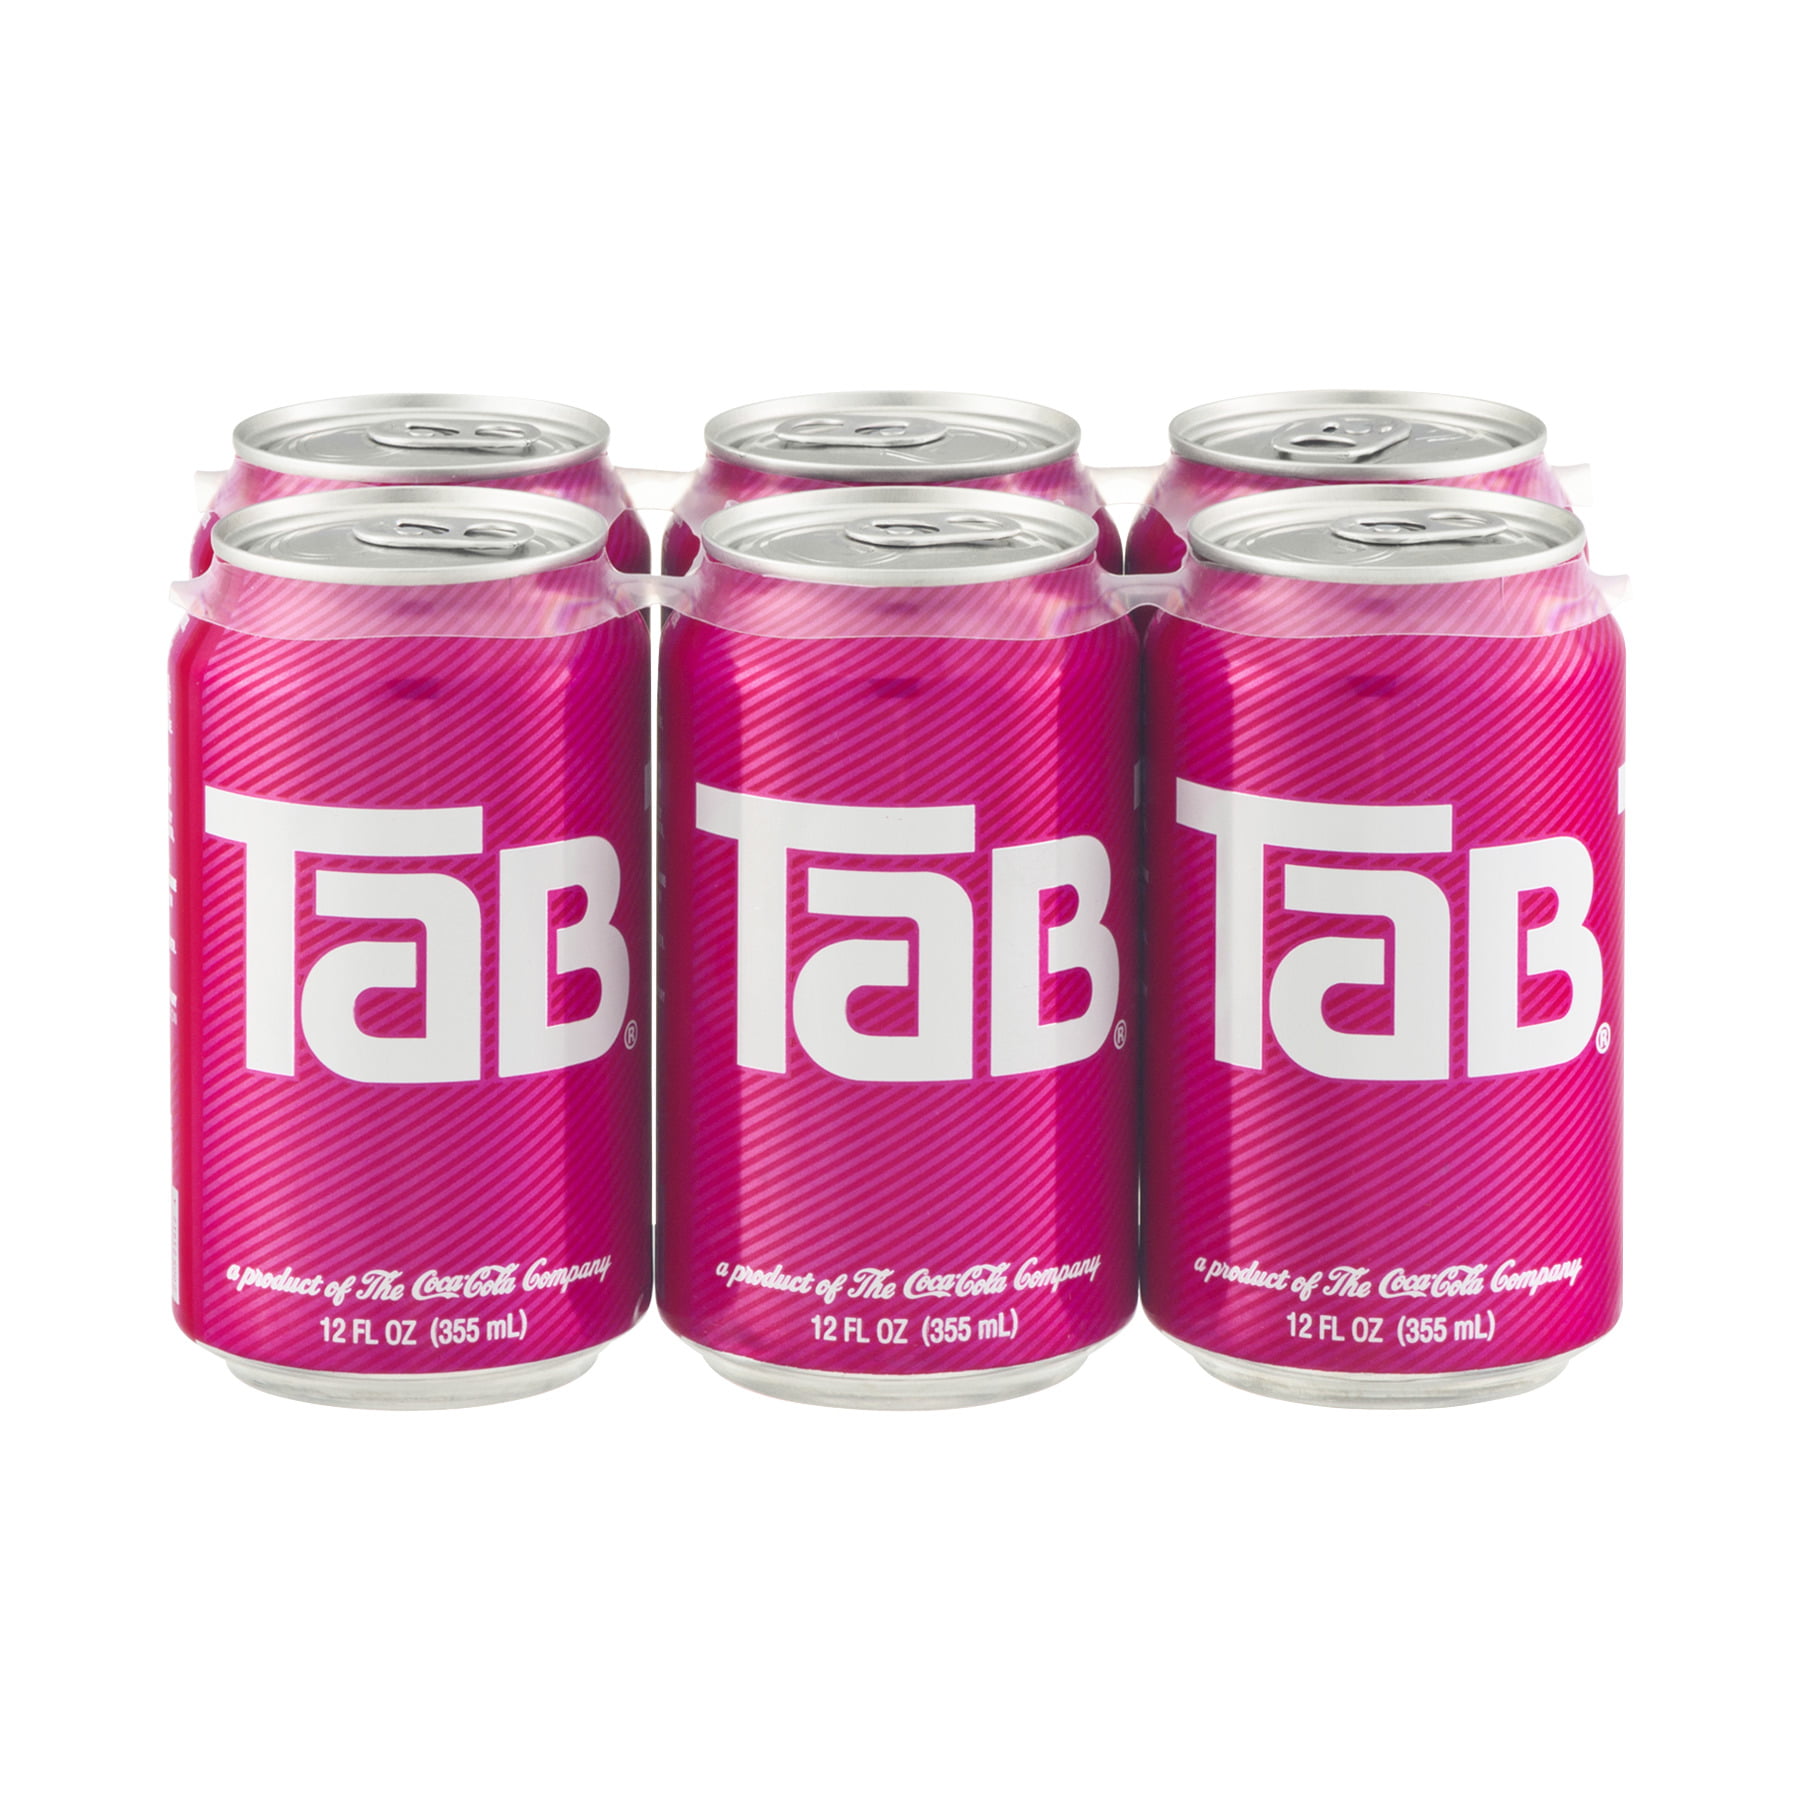 Tab: Who Invented This Classic Drink?